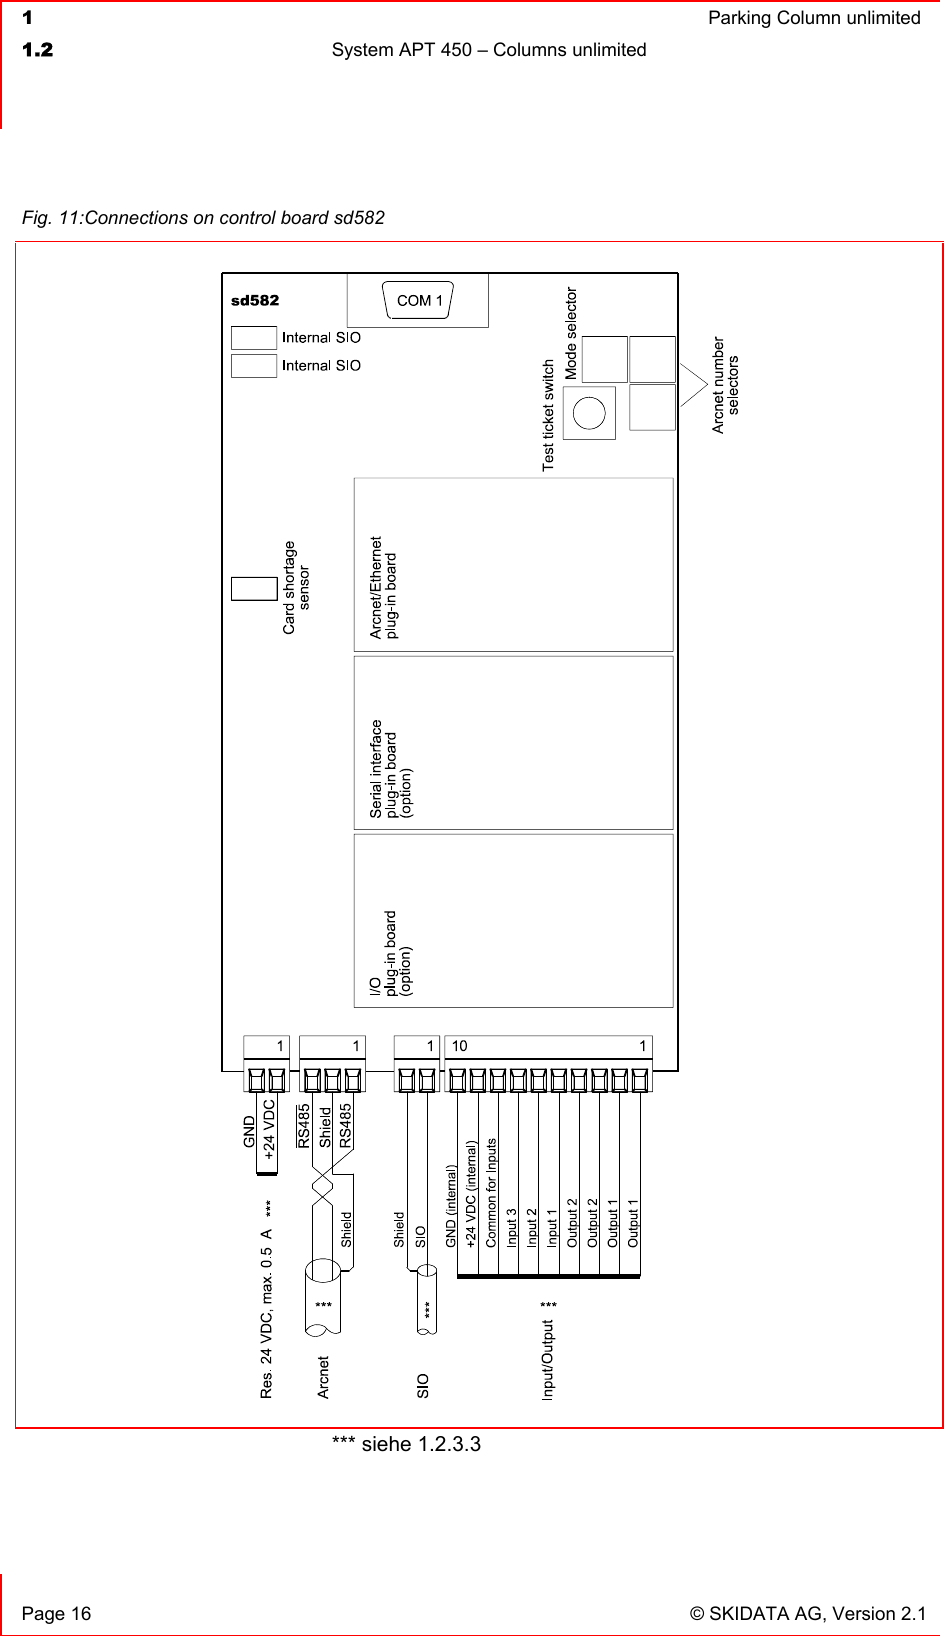  1  Parking Column unlimited1.2  System APT 450 – Columns unlimited   Page 16  © SKIDATA AG, Version 2.1 *** siehe 1.2.3.3 Fig. 11:Connections on control board sd582 